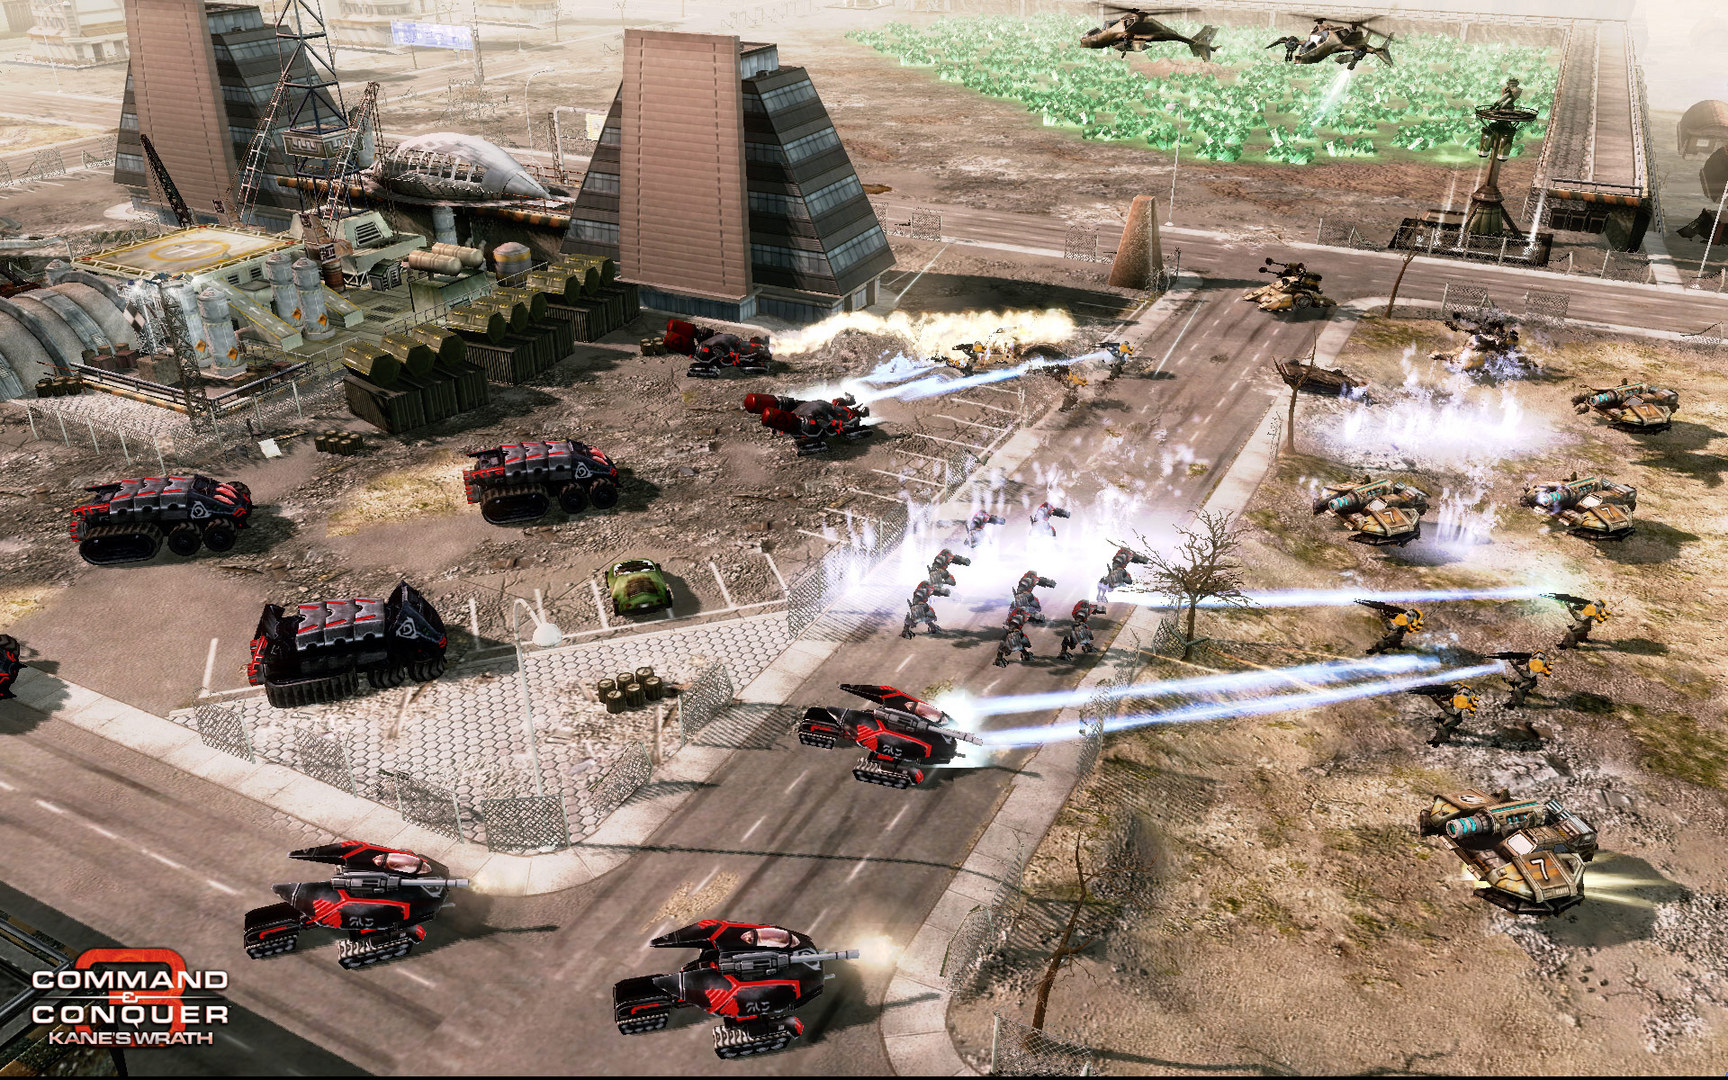 Find the best laptops for Command & Conquer 3: Kane’s Wrath